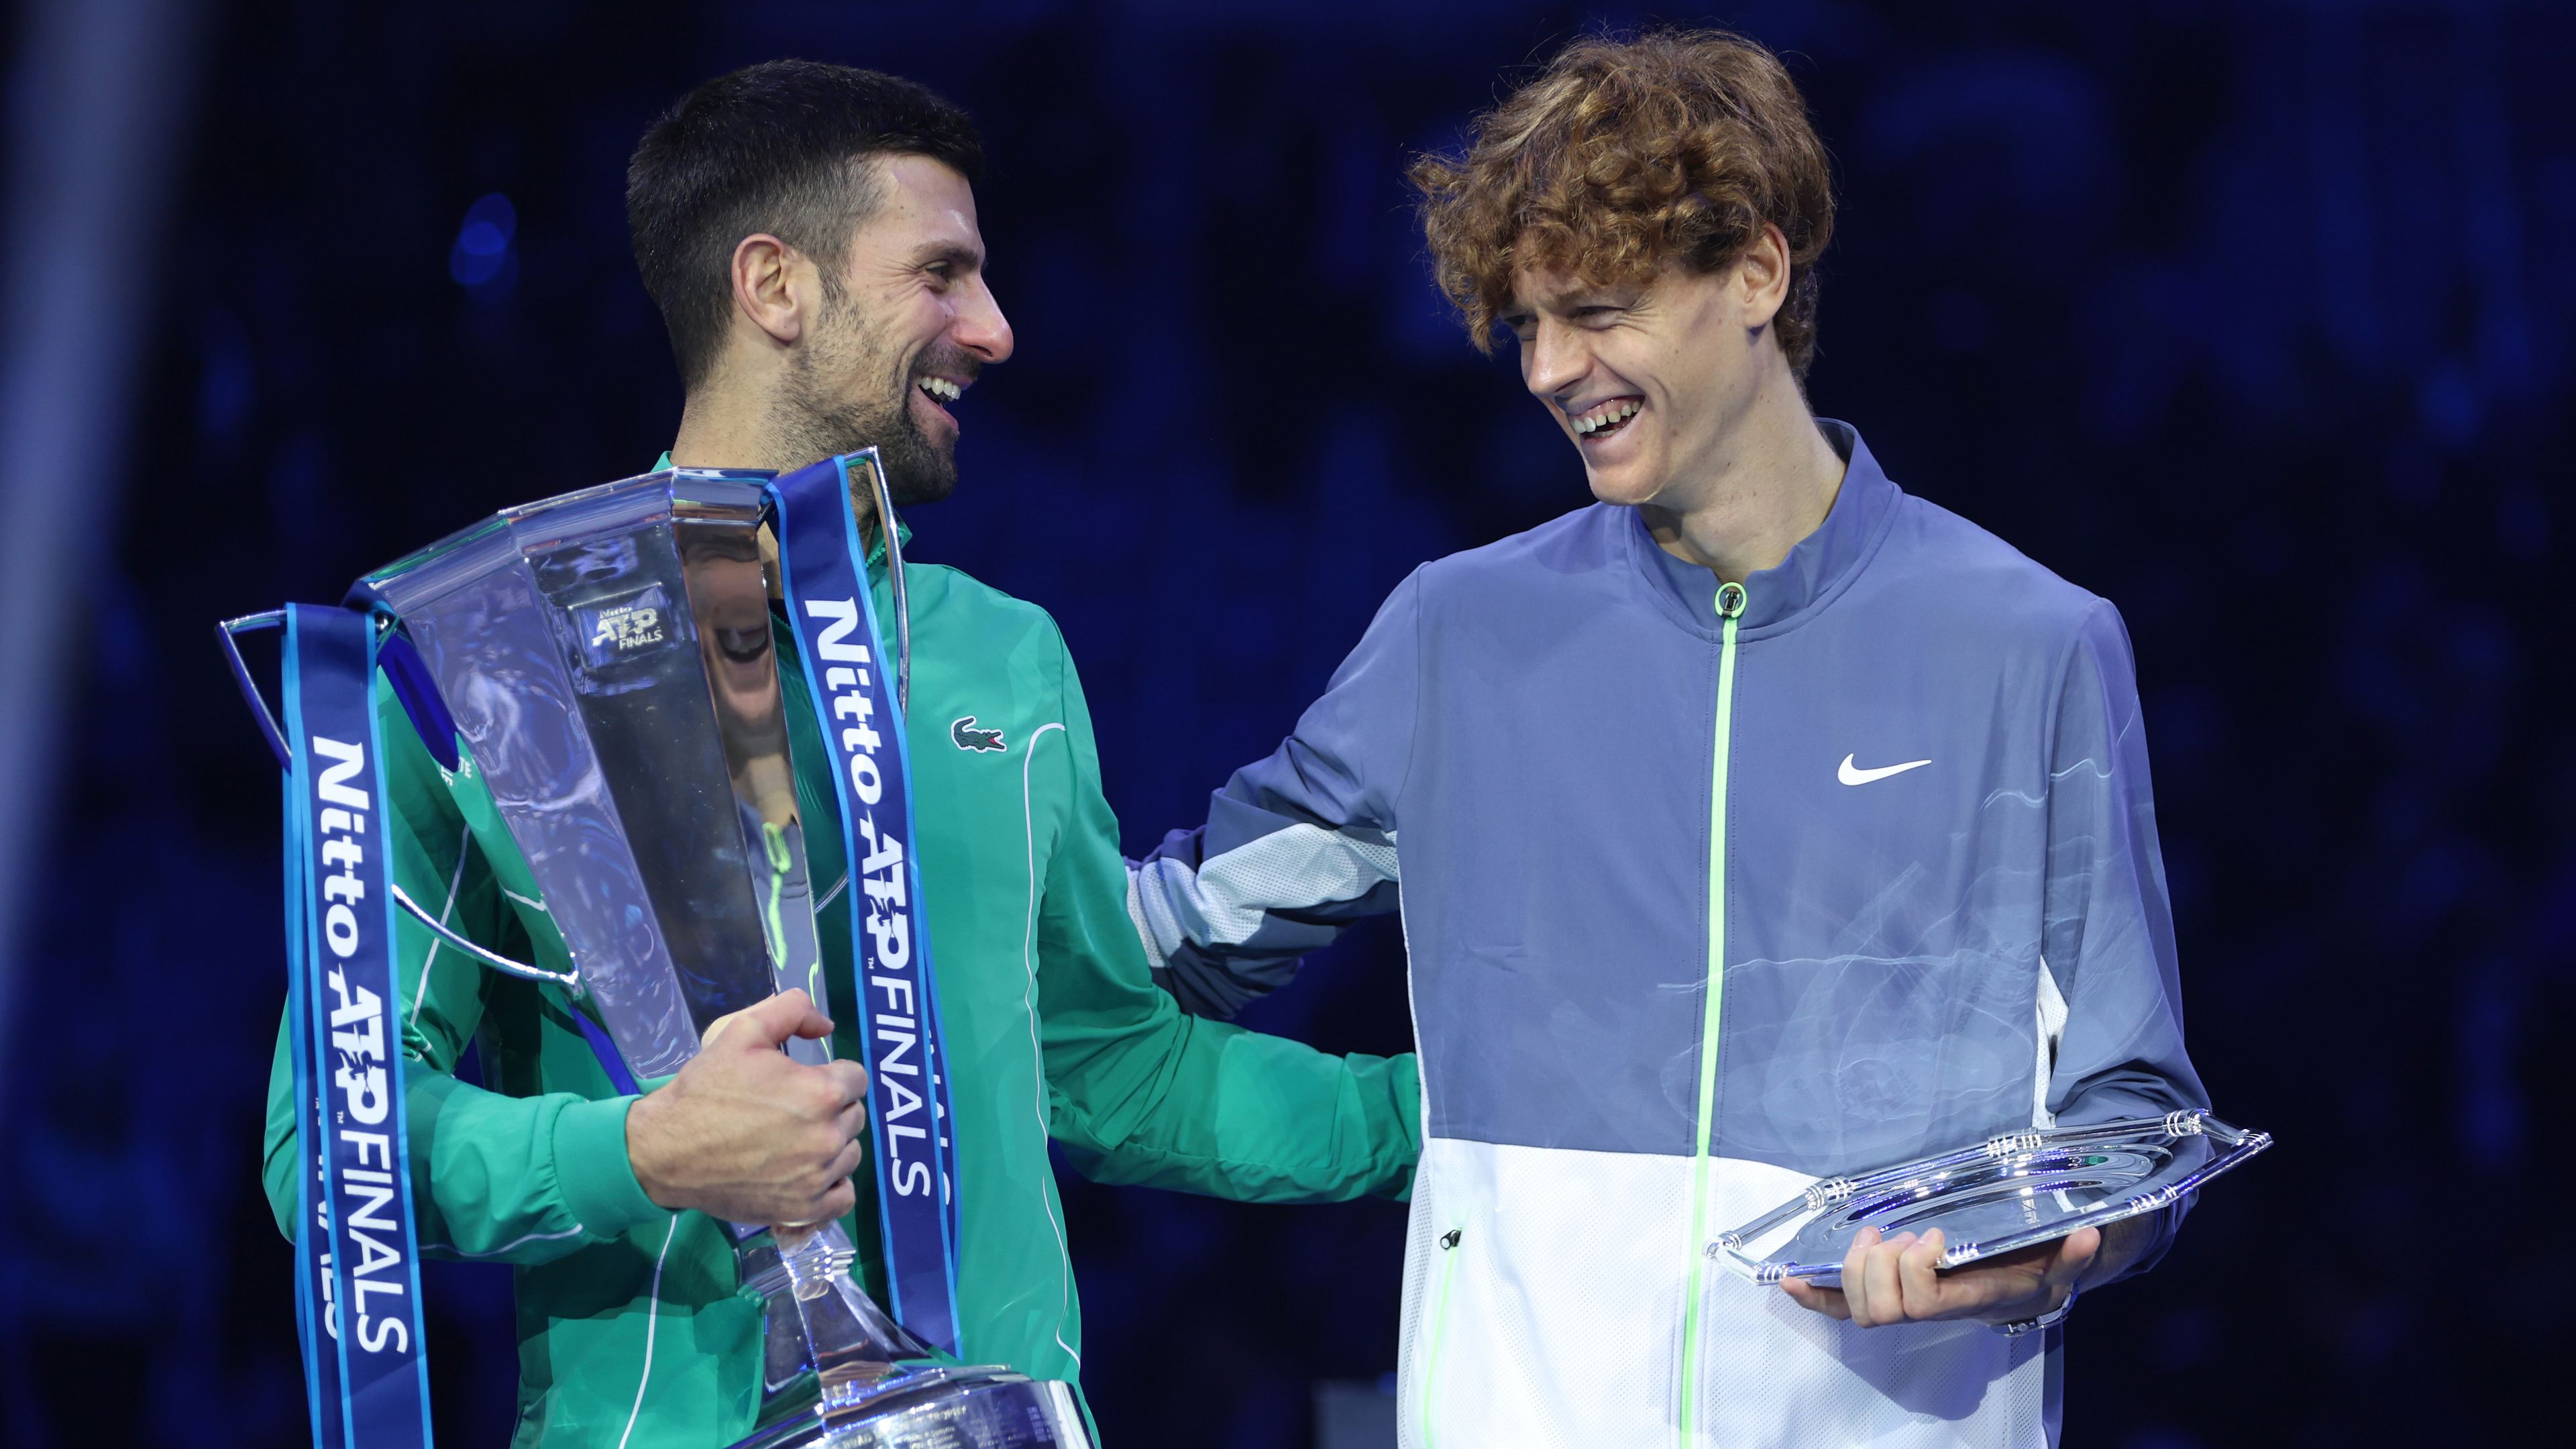 Novak Djokovic and Jannik Sinner of Italy during the trophy presentation at the ATP Finals.